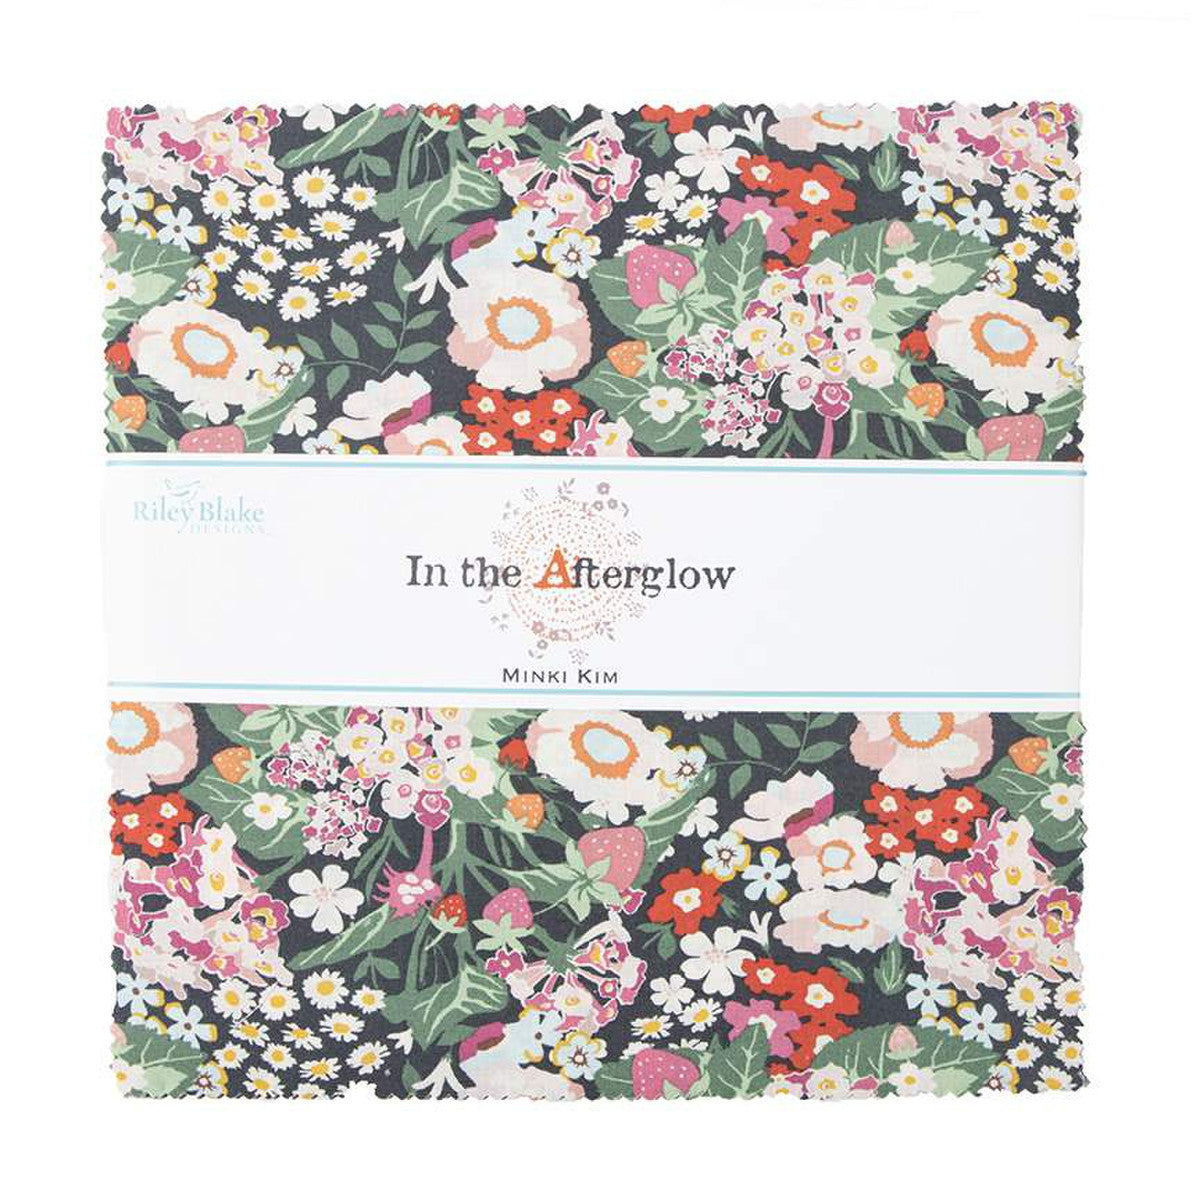 In the Afterglow 10" Stacker 10-13370-42 from Riley Blake Designs